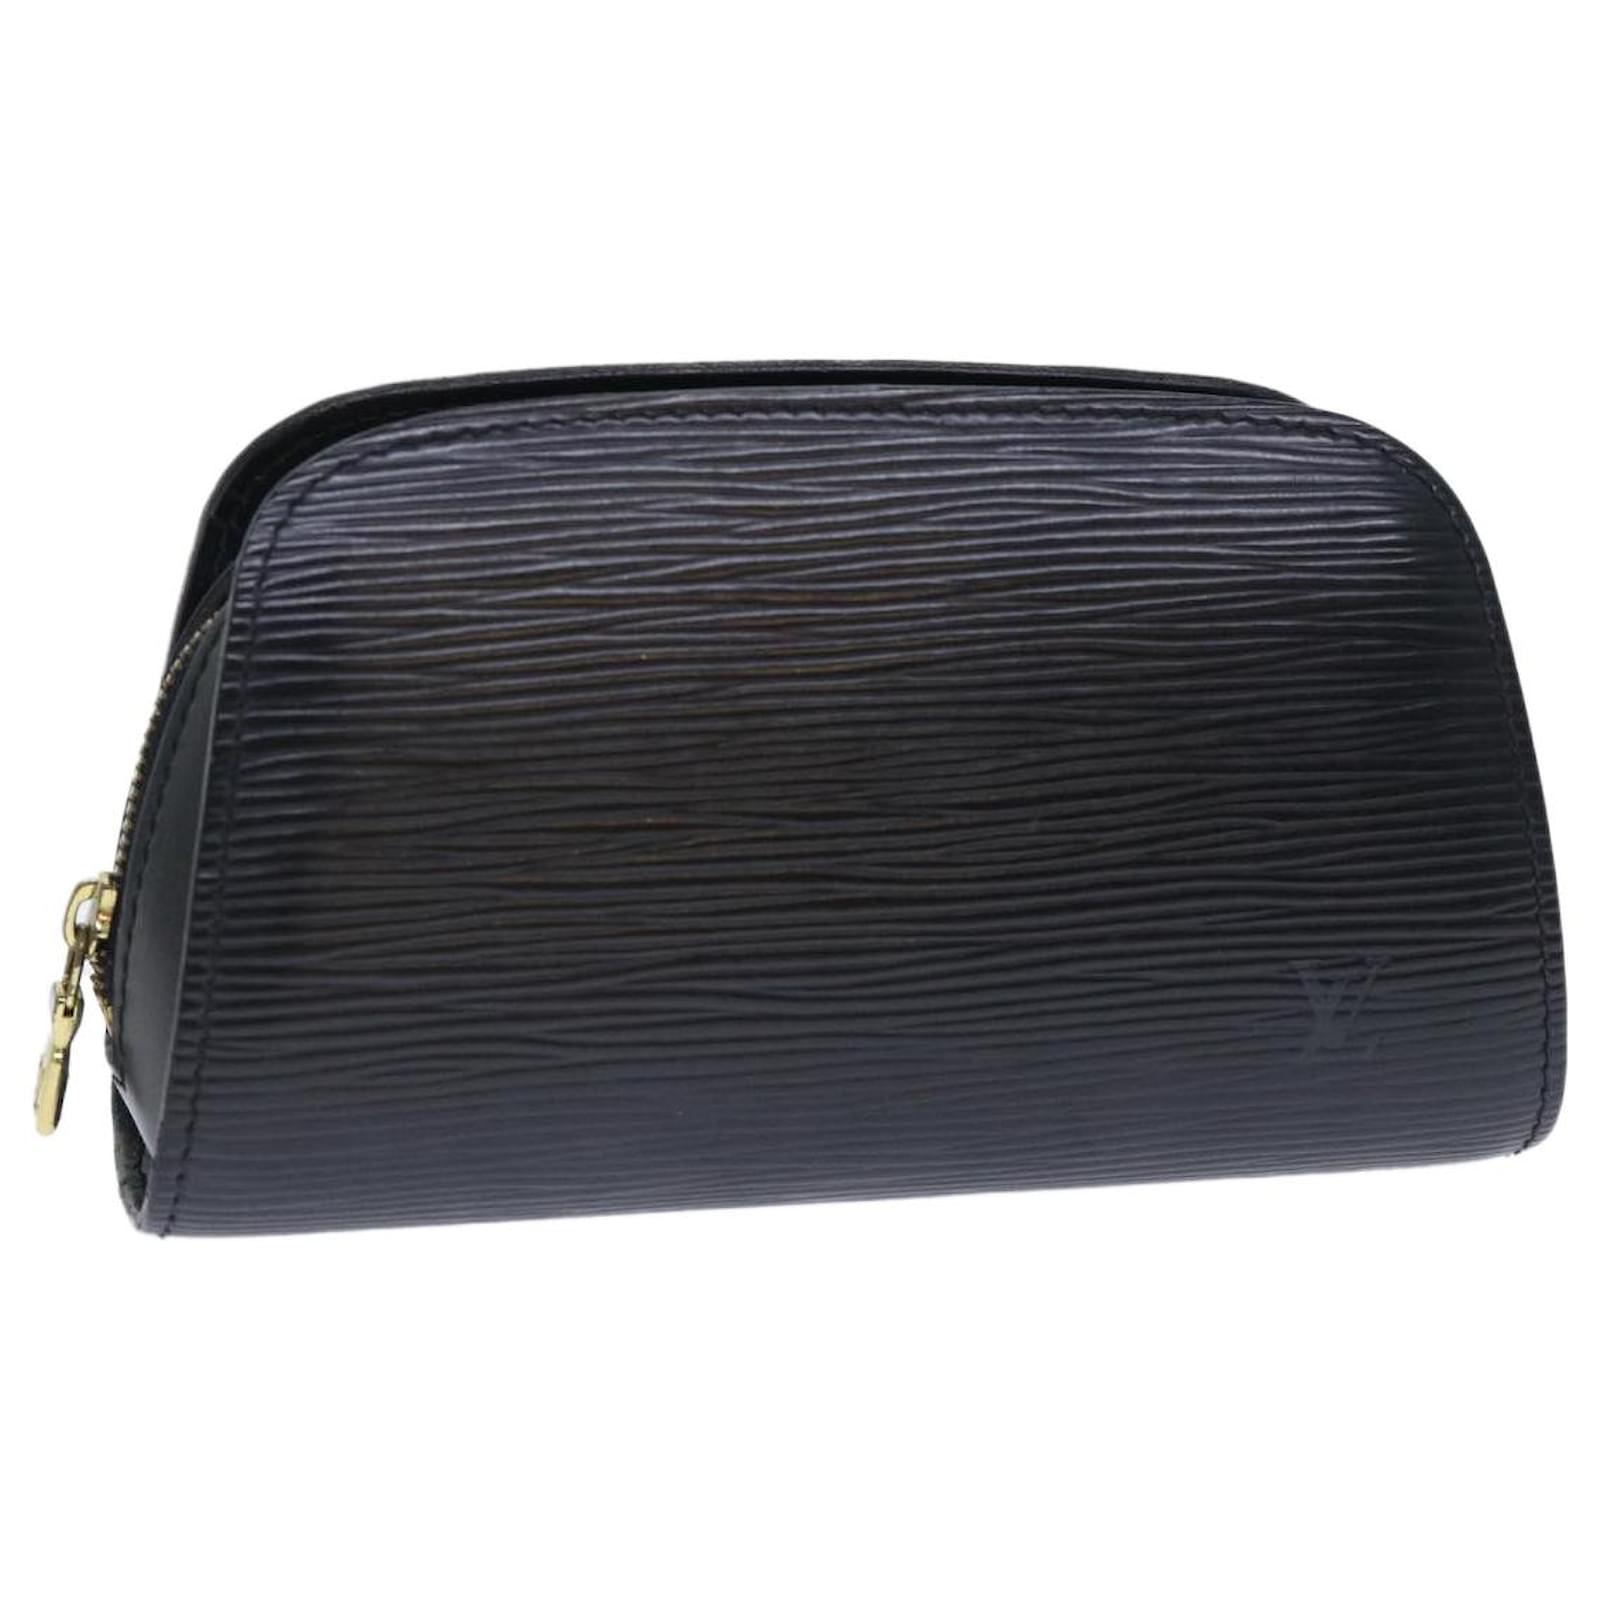 Louis Vuitton Dauphine Black Leather Clutch Bag (Pre-Owned)